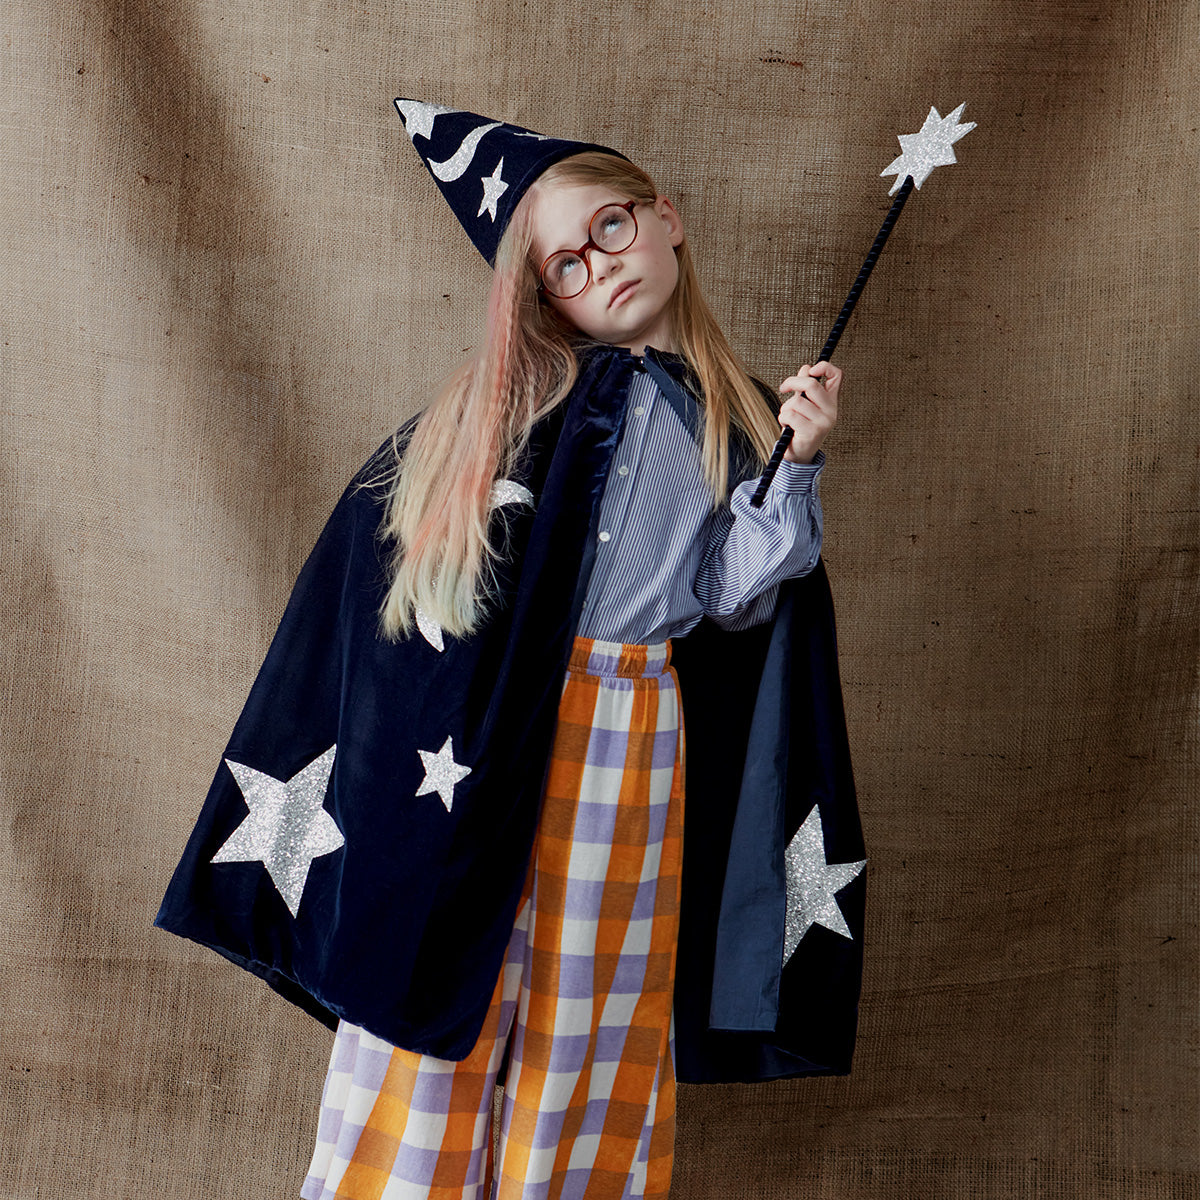 This wizard cape, wizard hat and star wand set, crafted from blue velvet and silver glitter fabric, is a fabulous costume for boys.